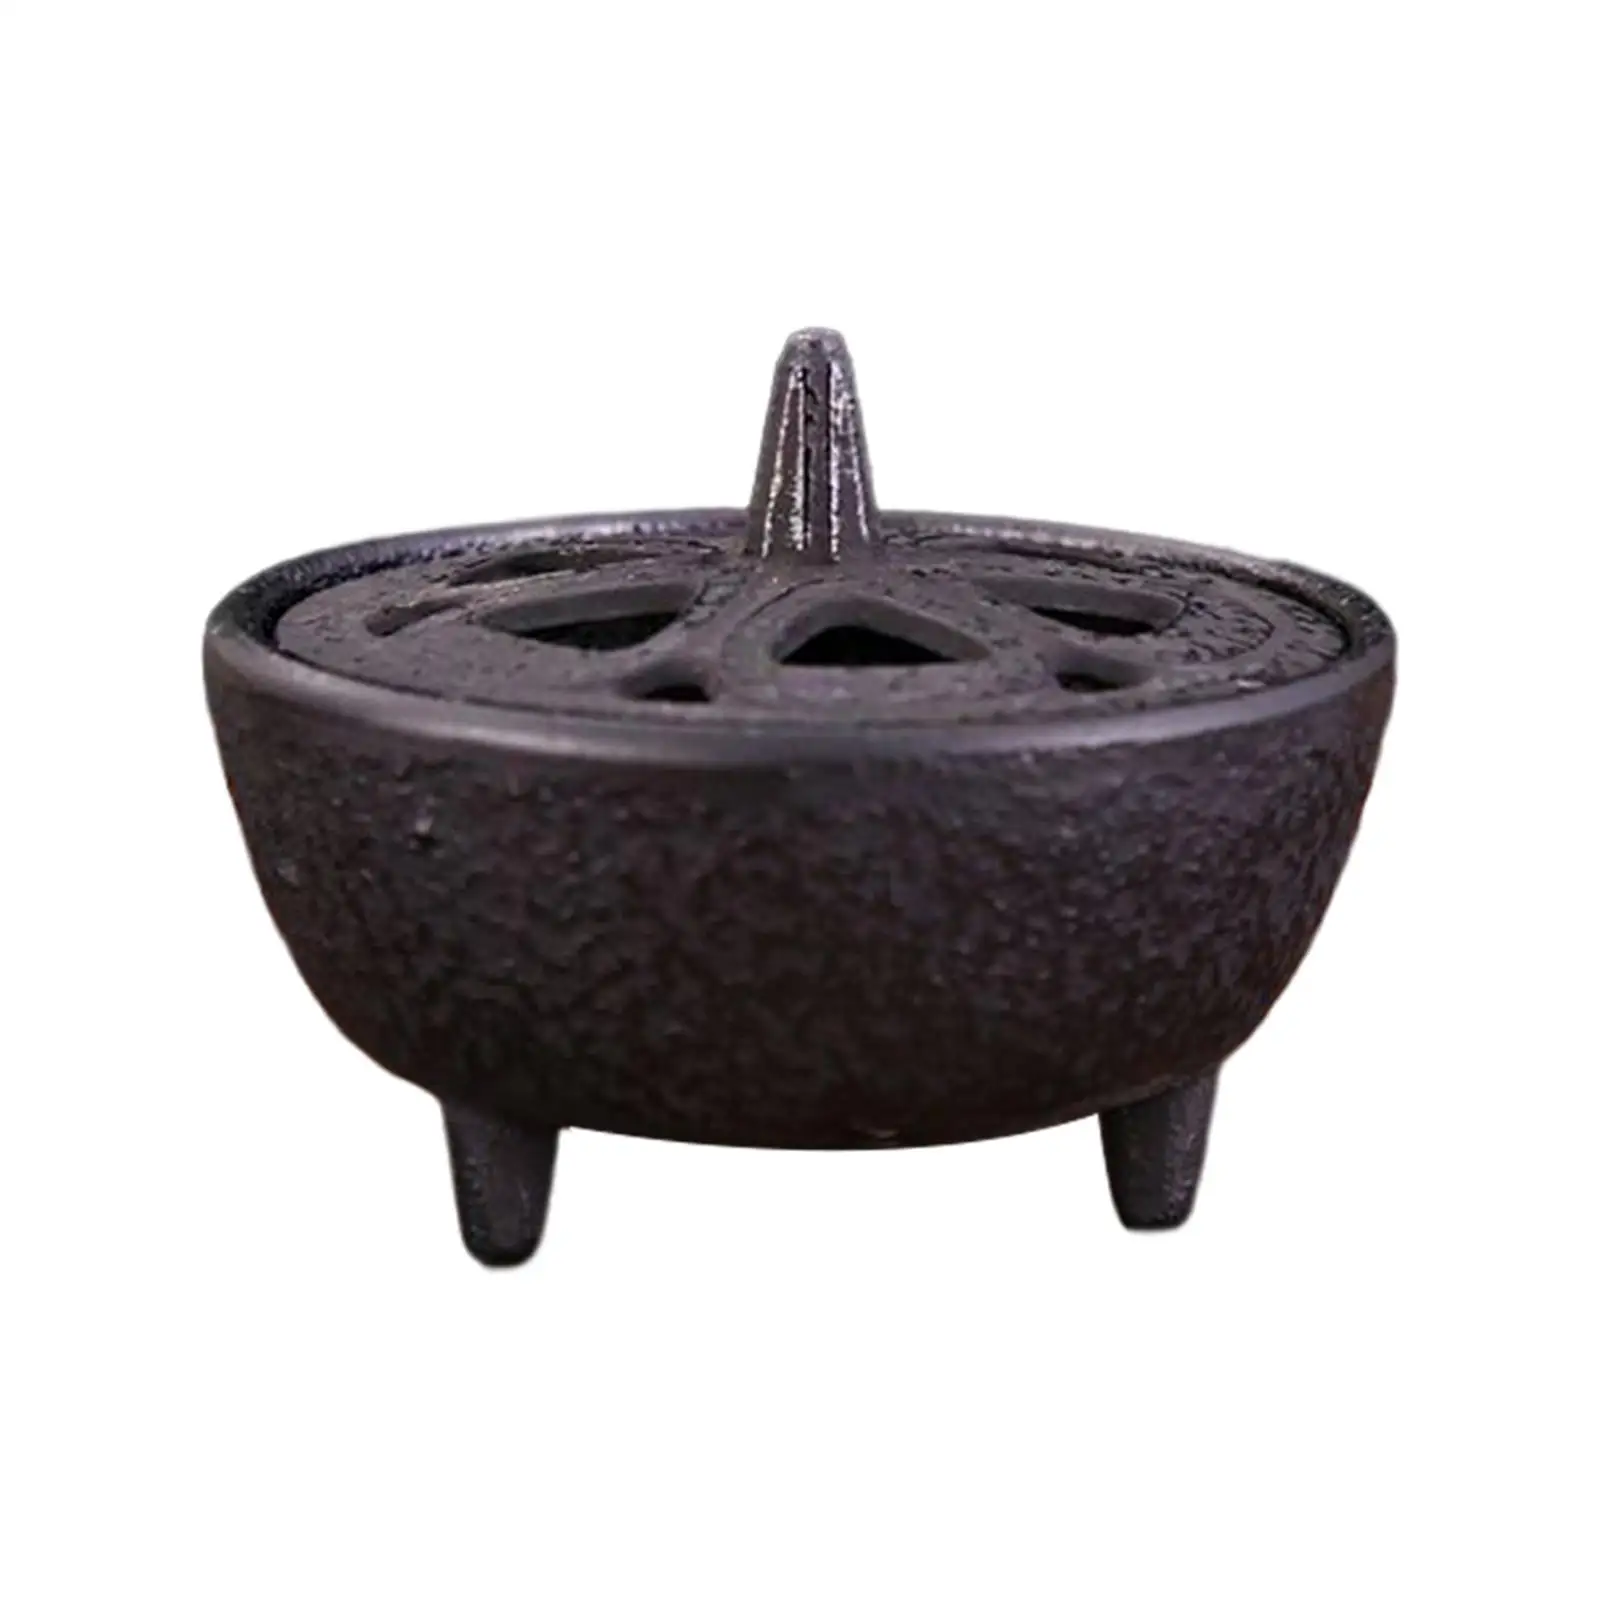 Cast Iron Incense Bowl Home Decoration Hollow Round with Lid Ornament Antique Hollow Burner Holder for Garden Patio Meditation